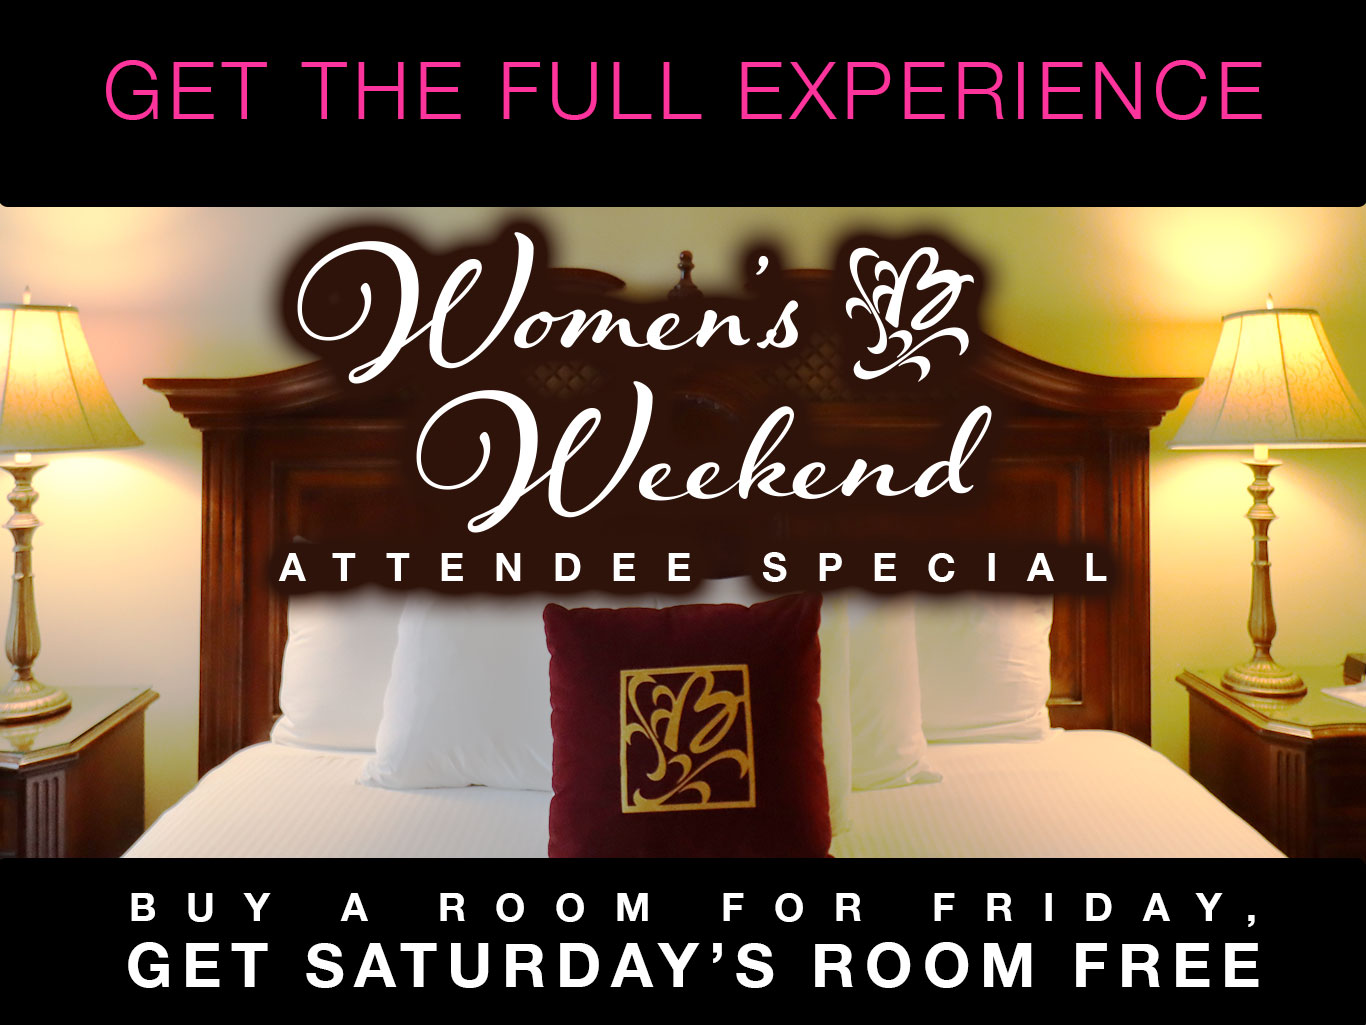 Get the full womens weekend experience with the attendee special - buy a room for friday and get saturday's room free!